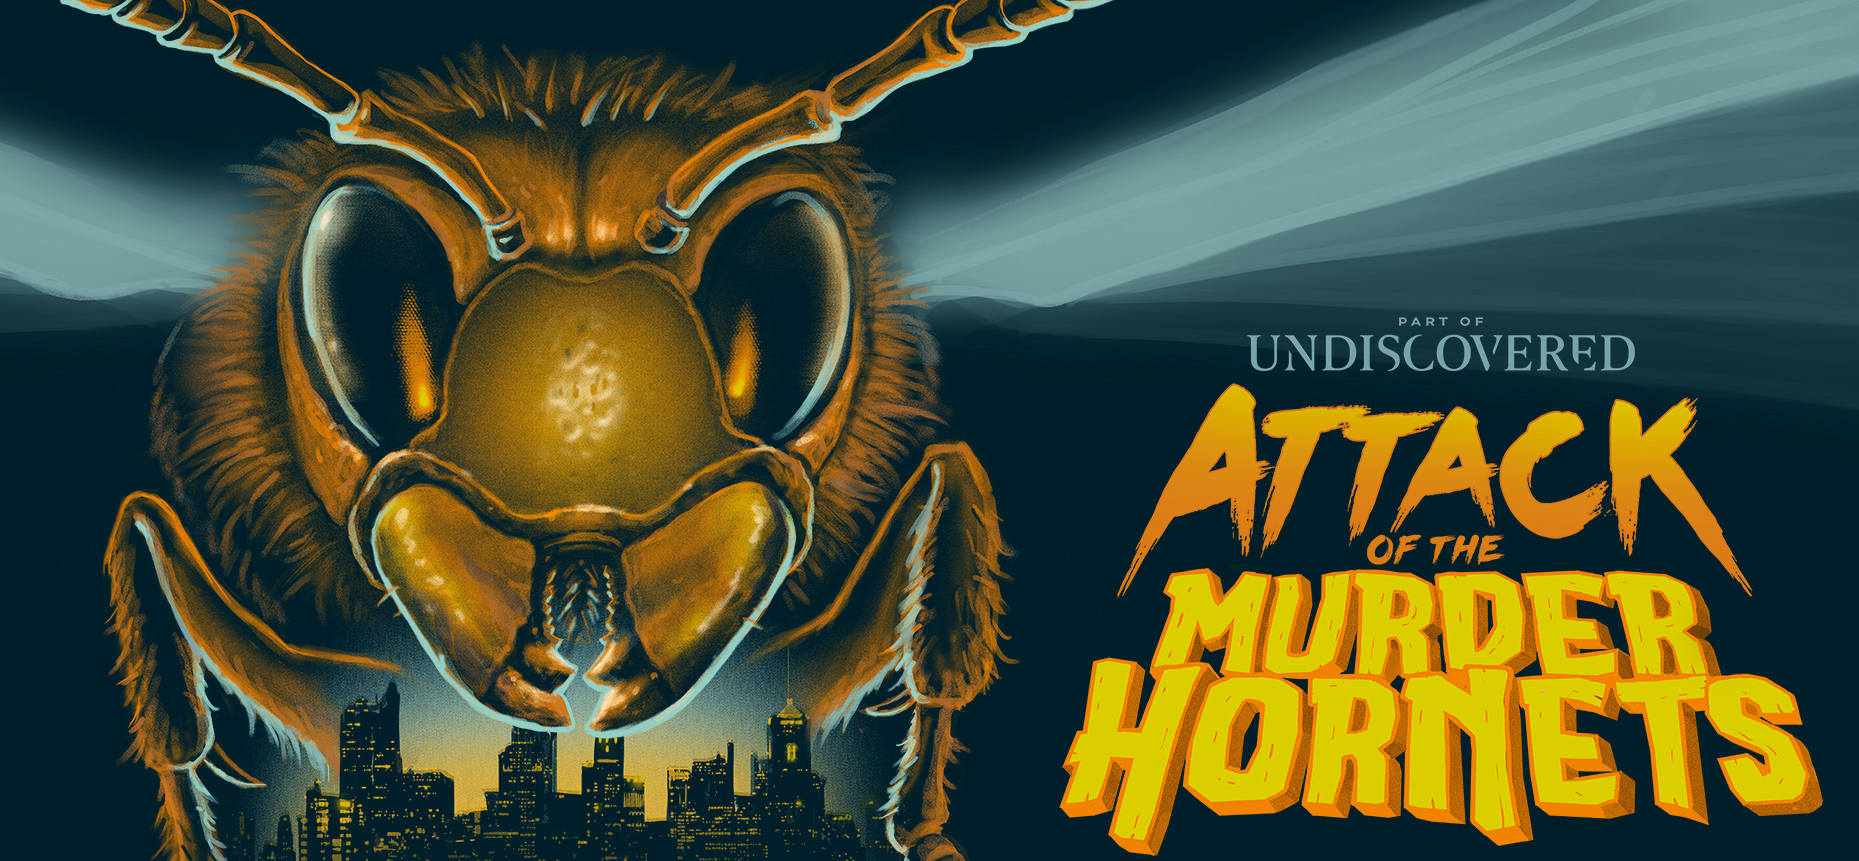 <i>Attack of the Murder Hornets</i>: Discovery's New Doc Showcases Real Life Horror Story